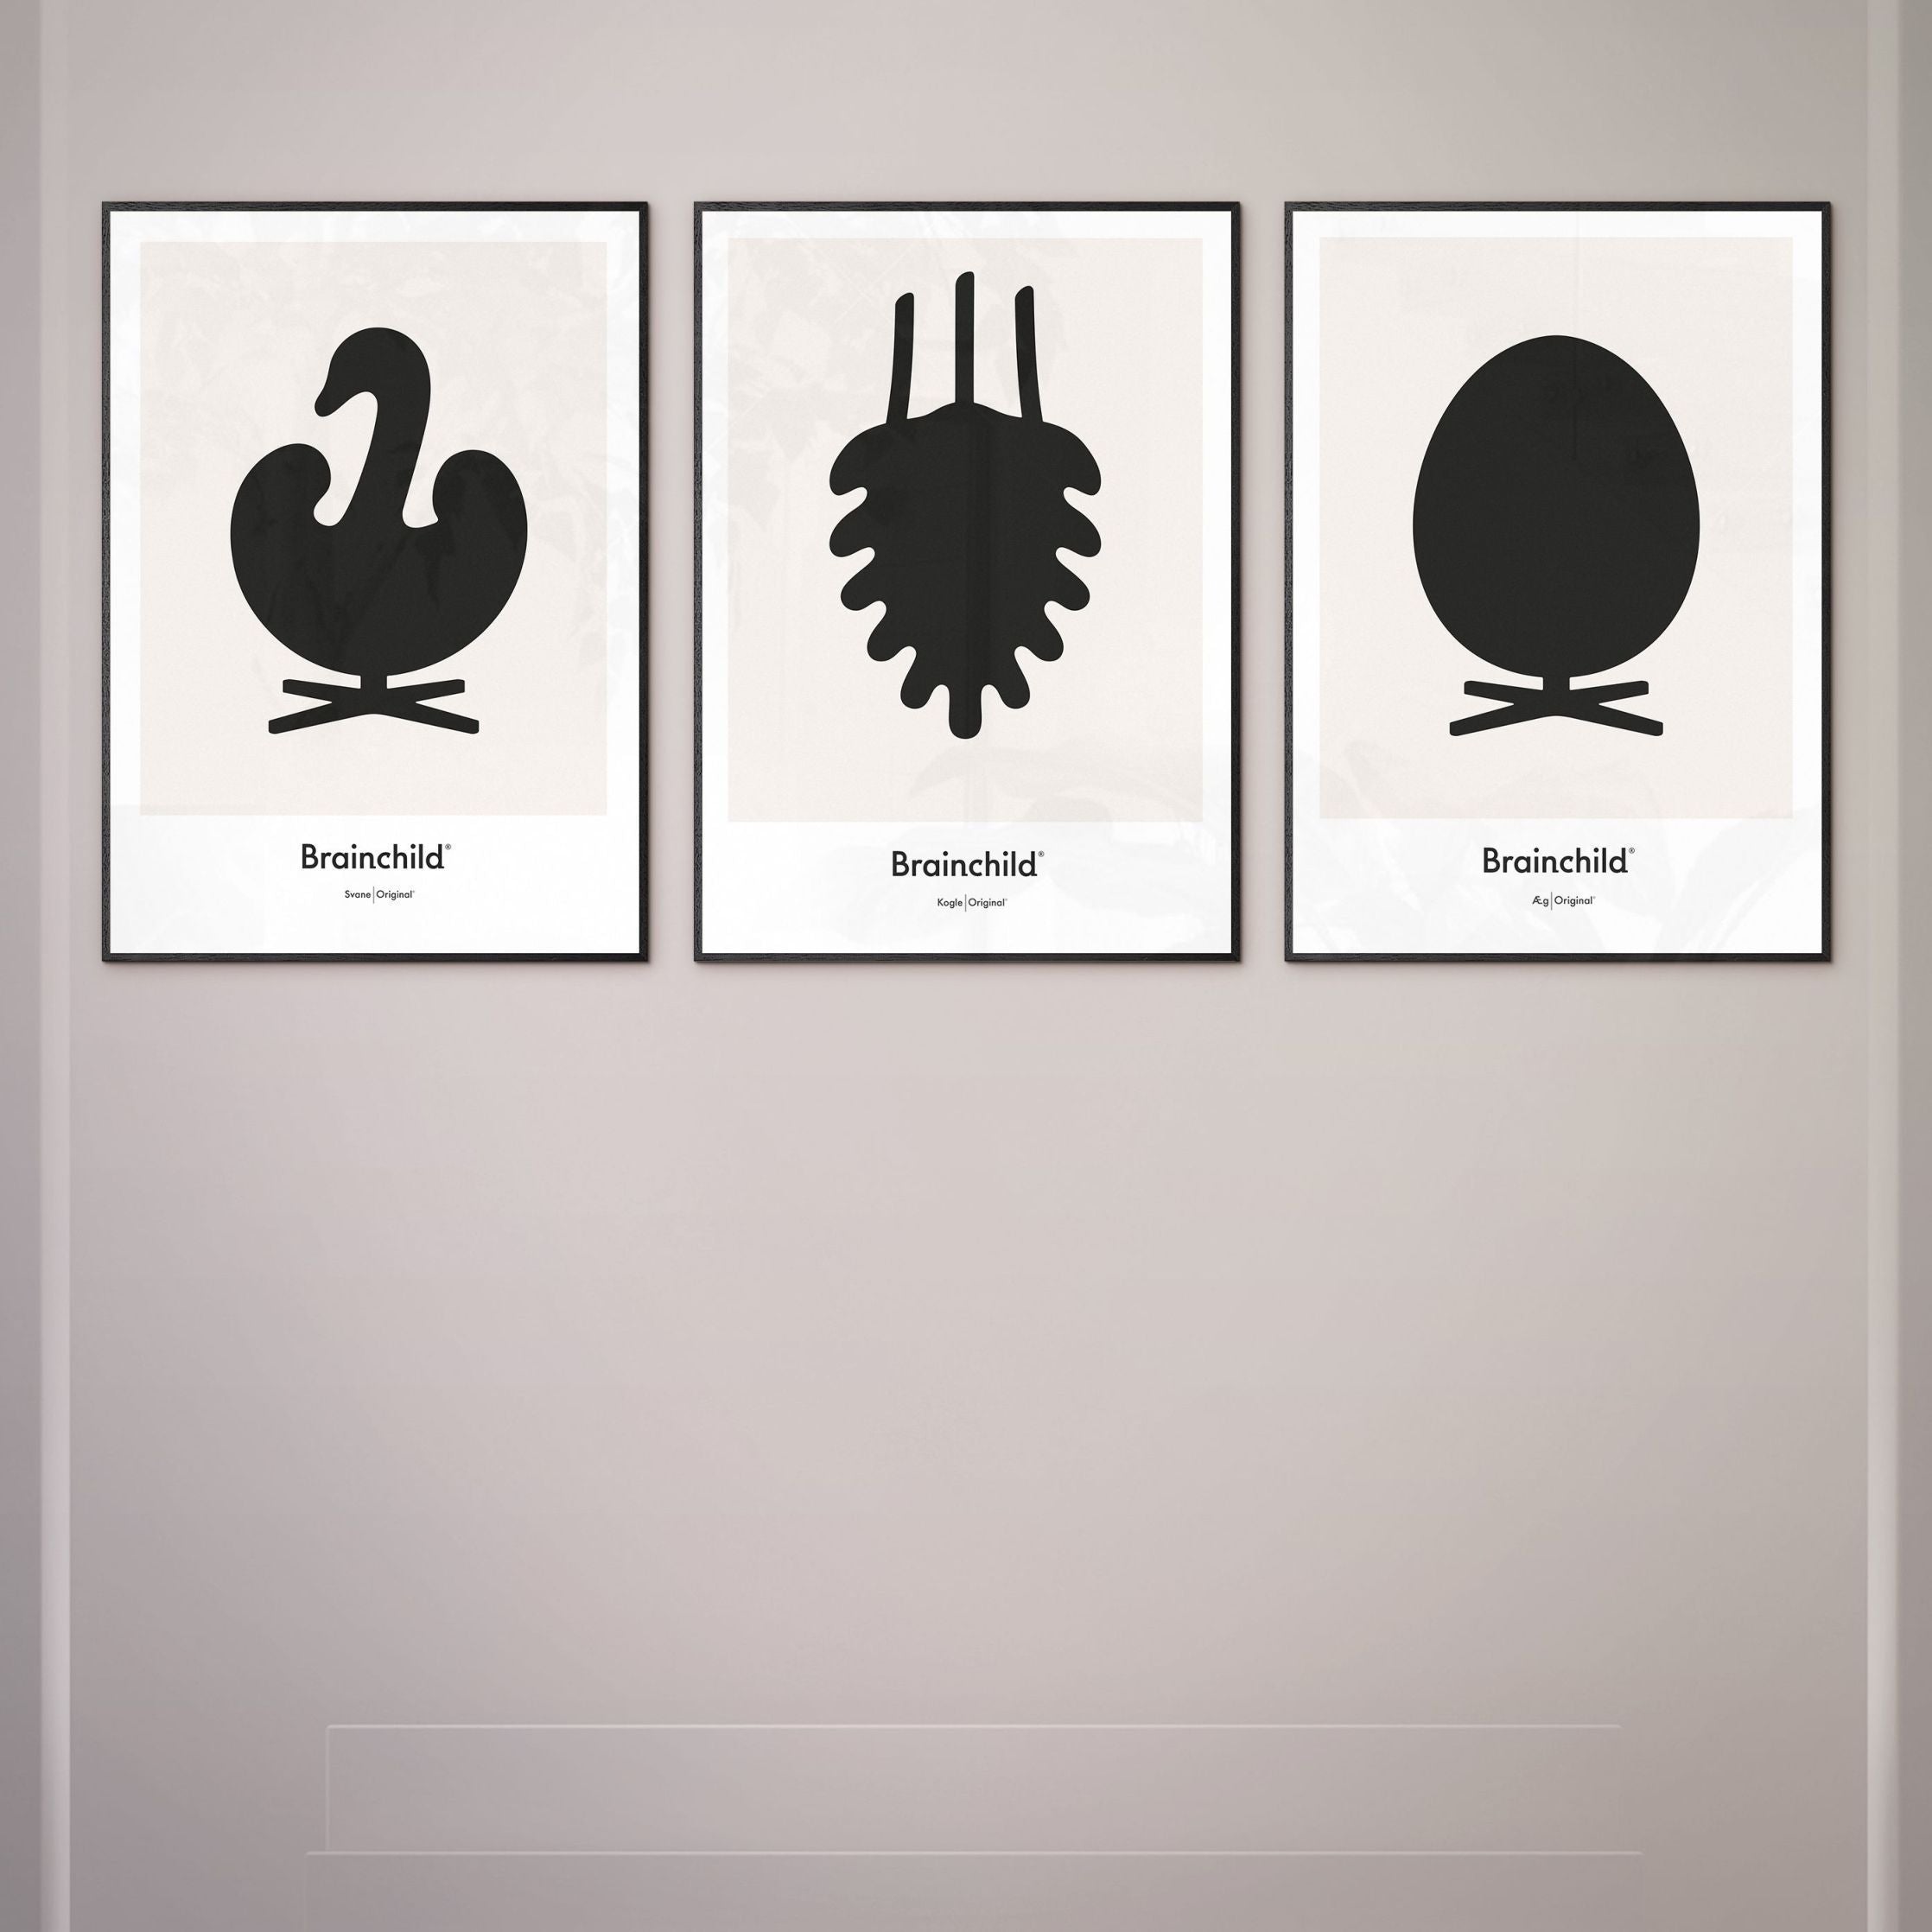 Brainchild Pine Cone Design Icon Poster, Frame Made Of Black Lacquered Wood 50x70 Cm, Grey